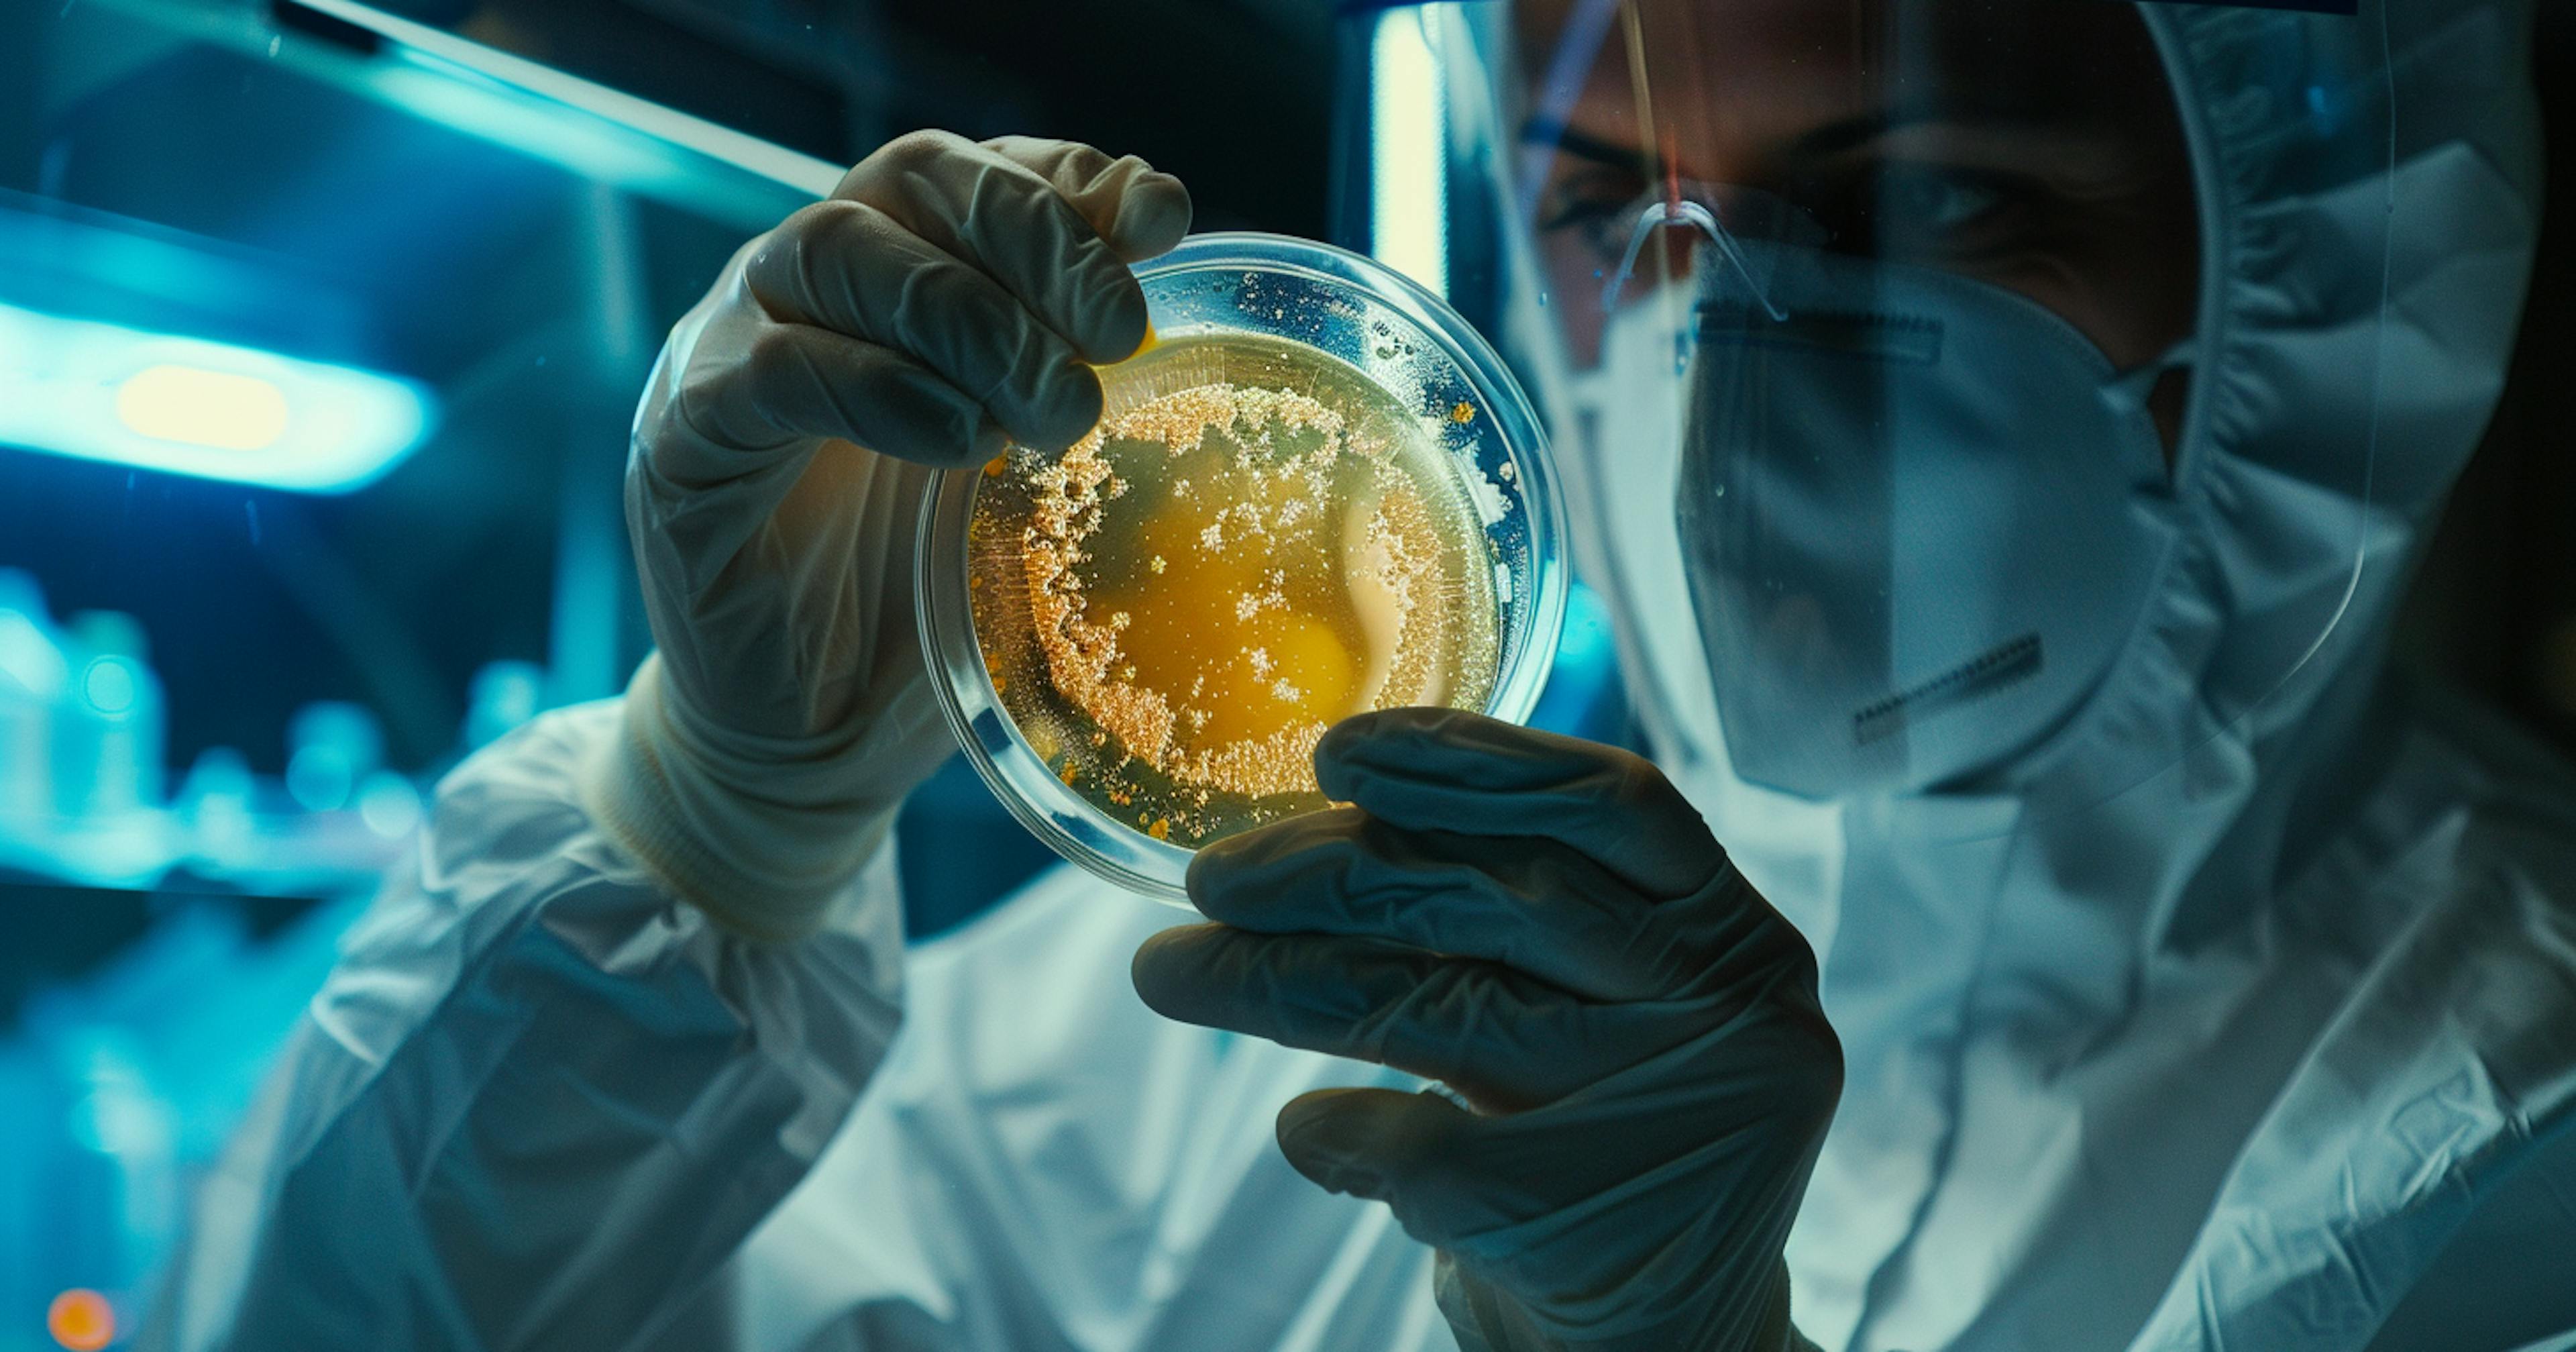 A scientist inspecting wearing full PPE inspecting a petri dish in a lab